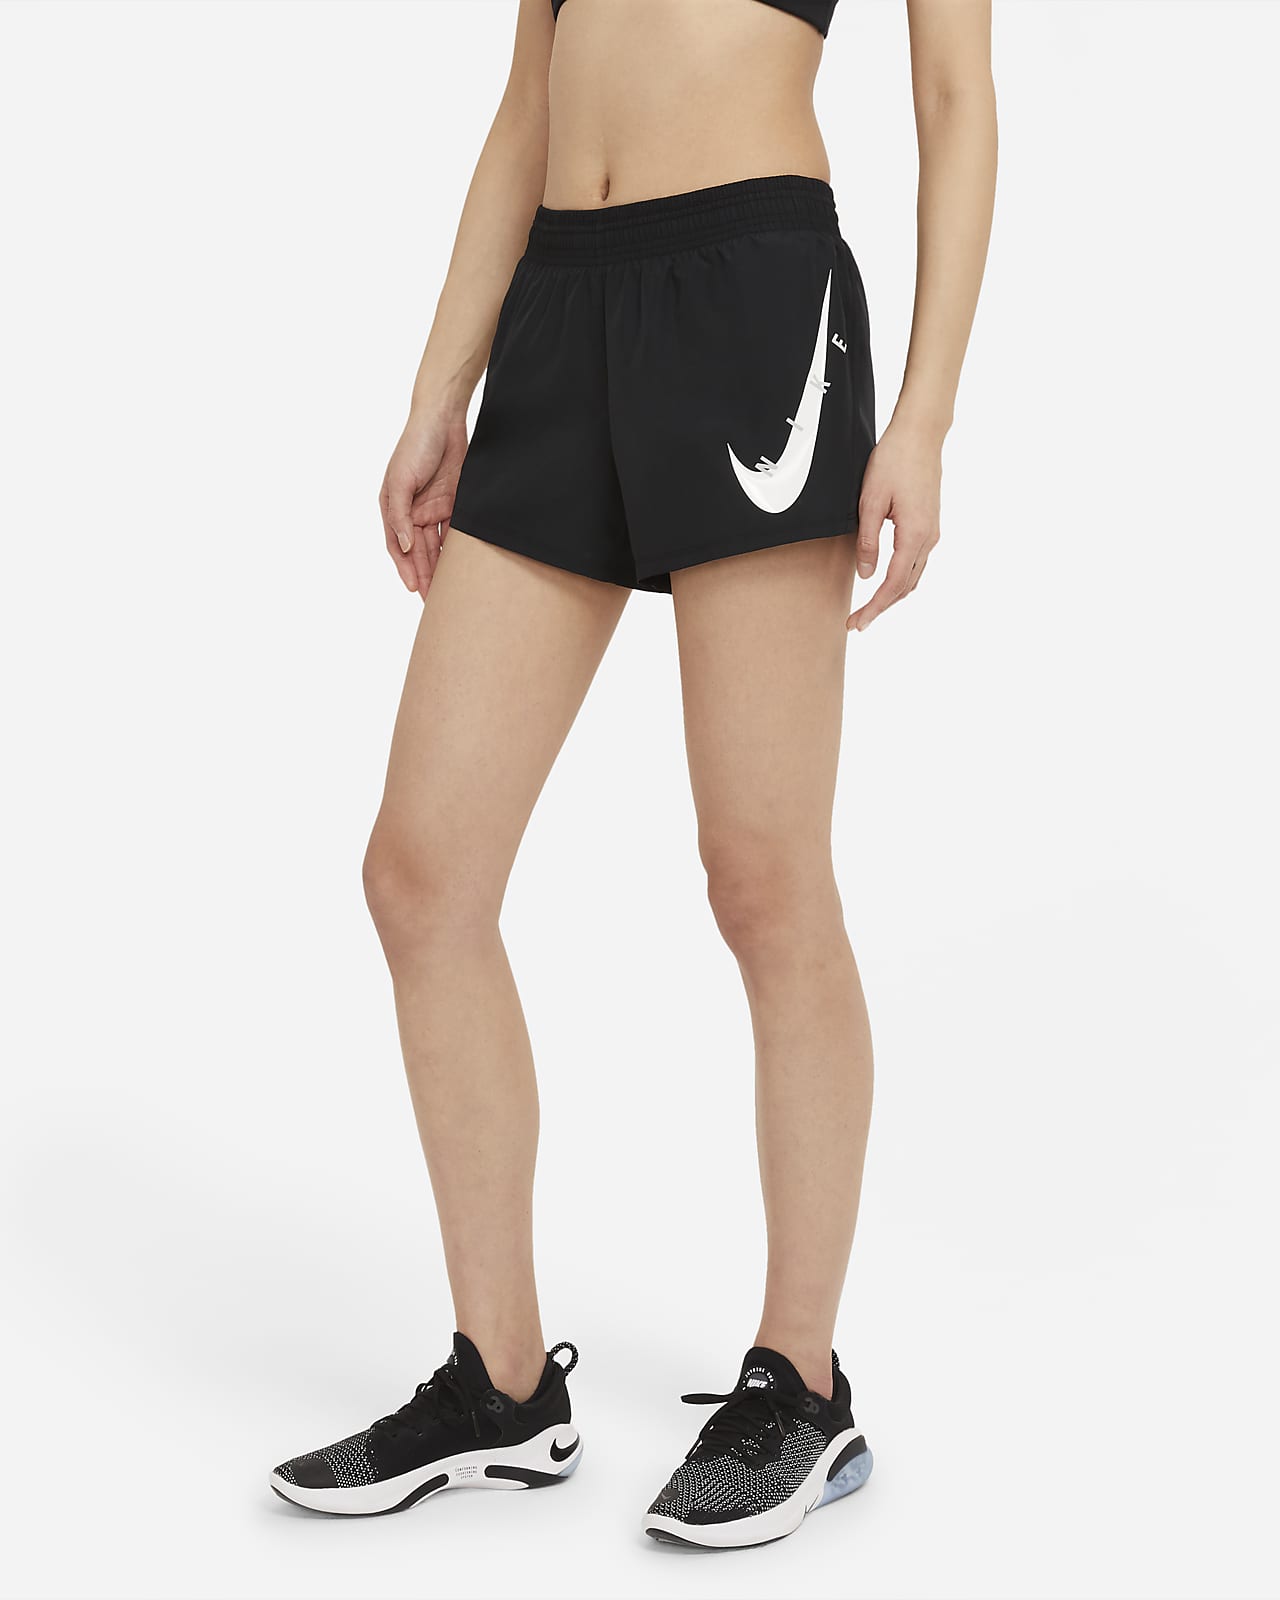 picture of nike swoosh